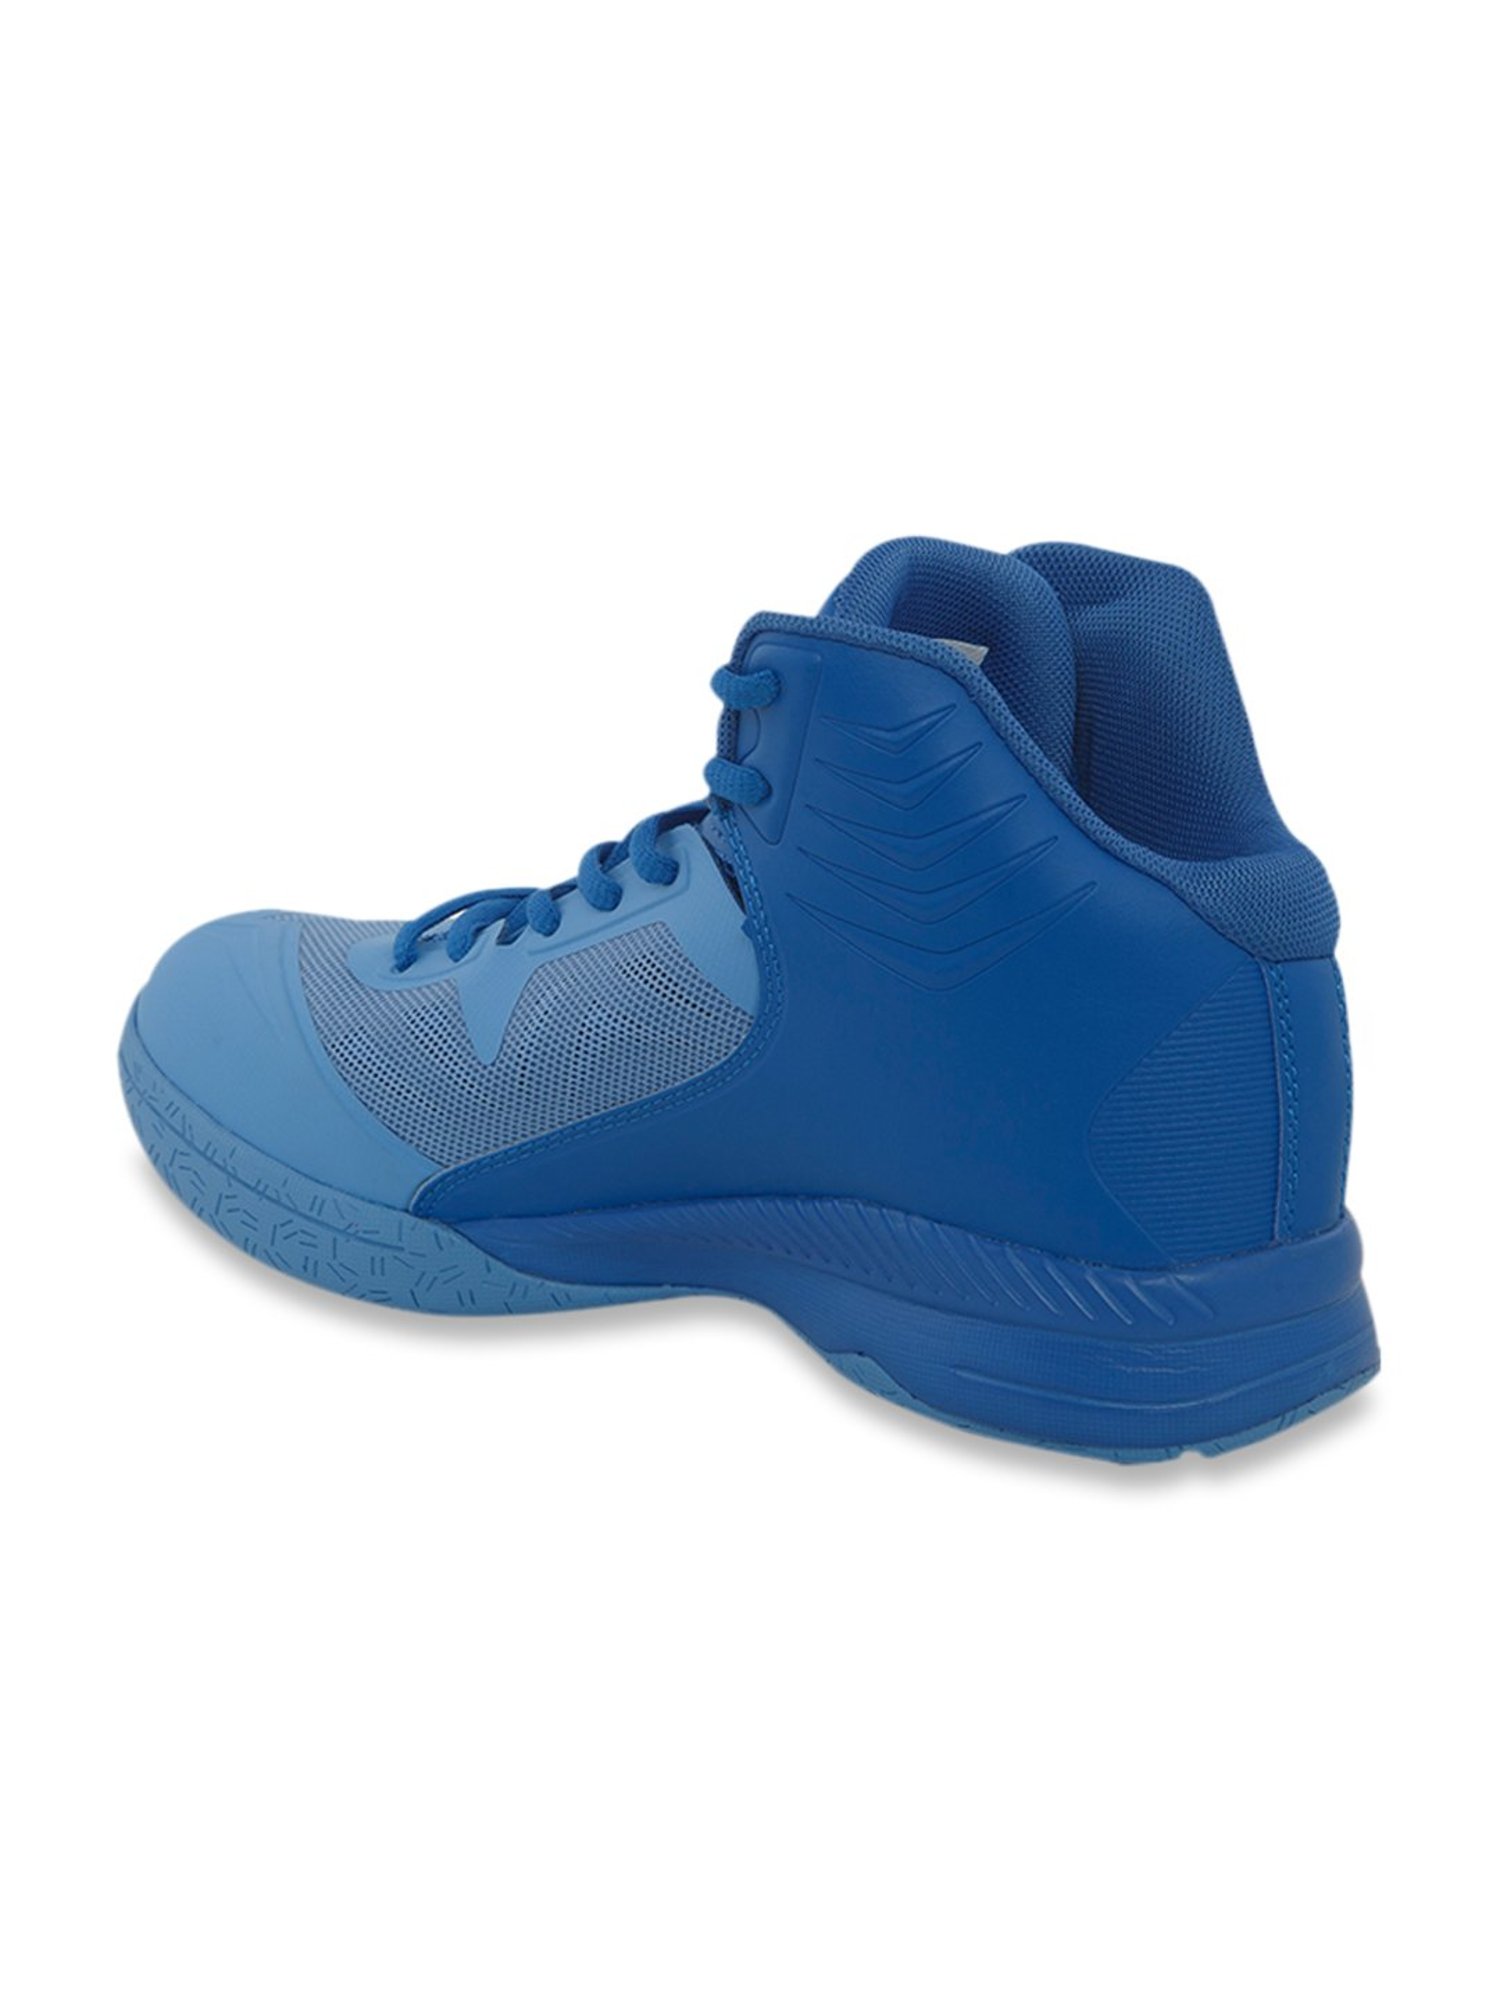 Furo by Red Chief Blue Basketball Shoes 